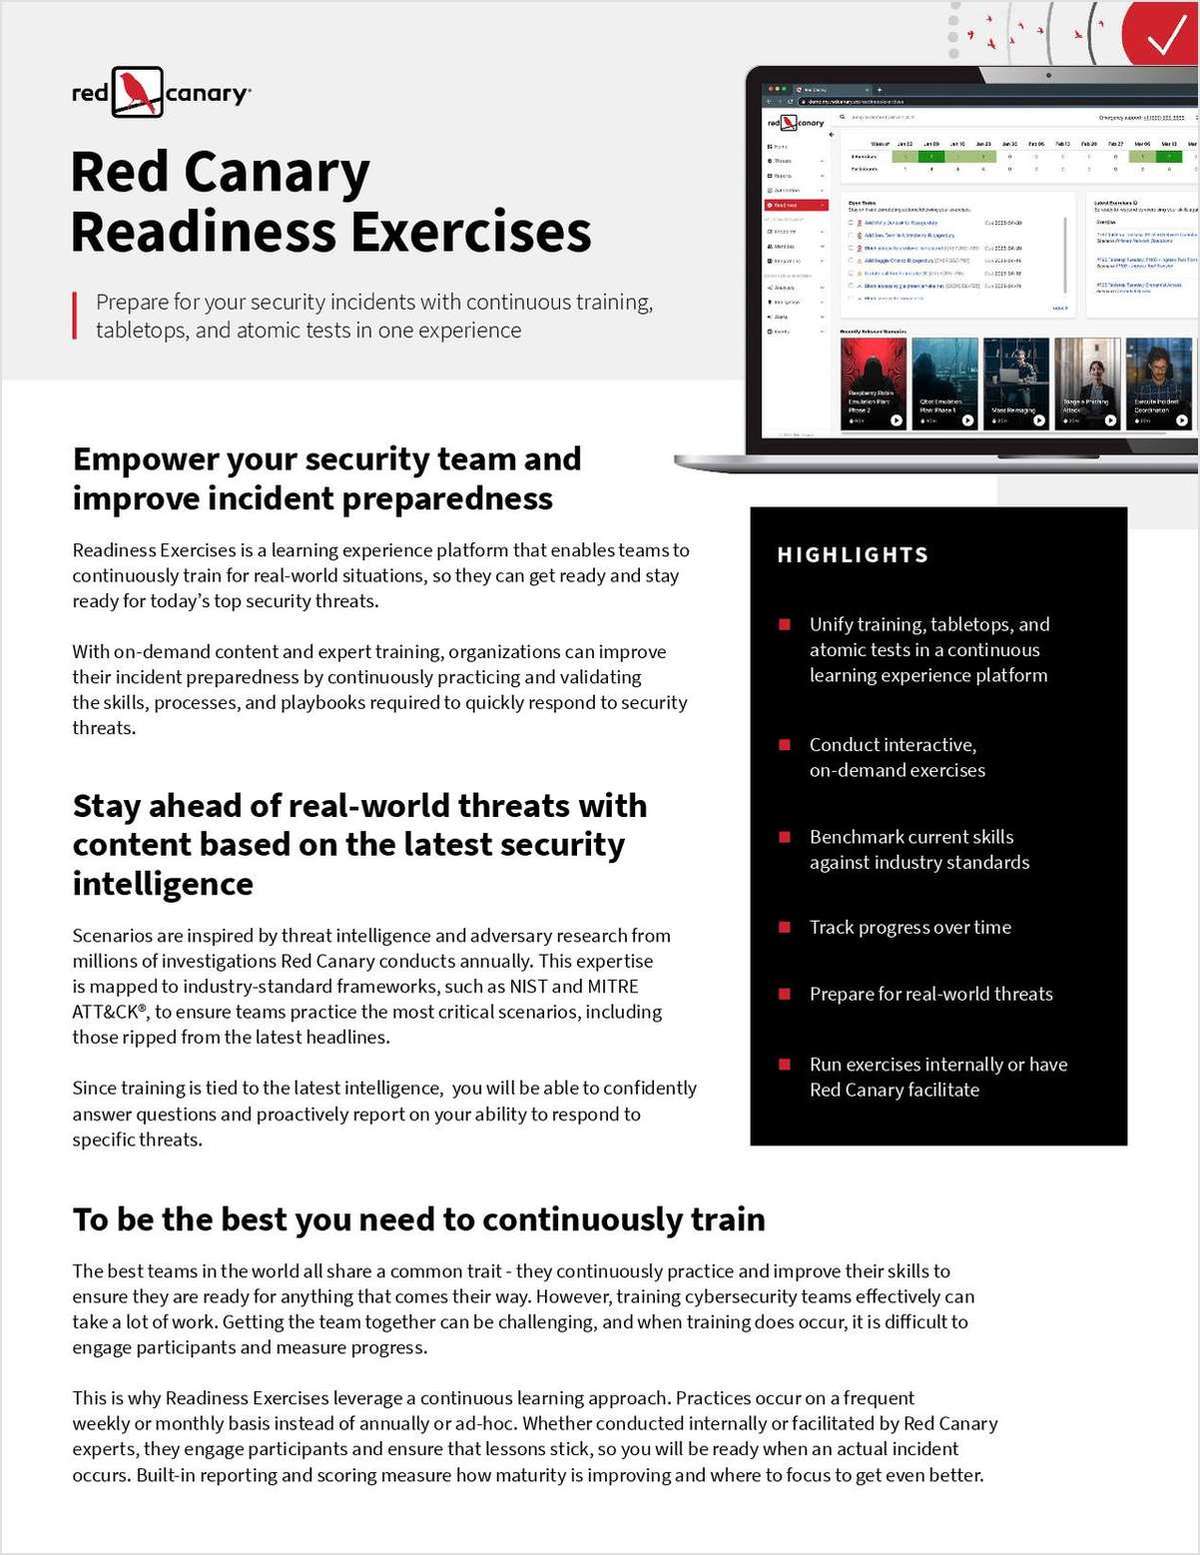 Red Canary Readiness Exercises